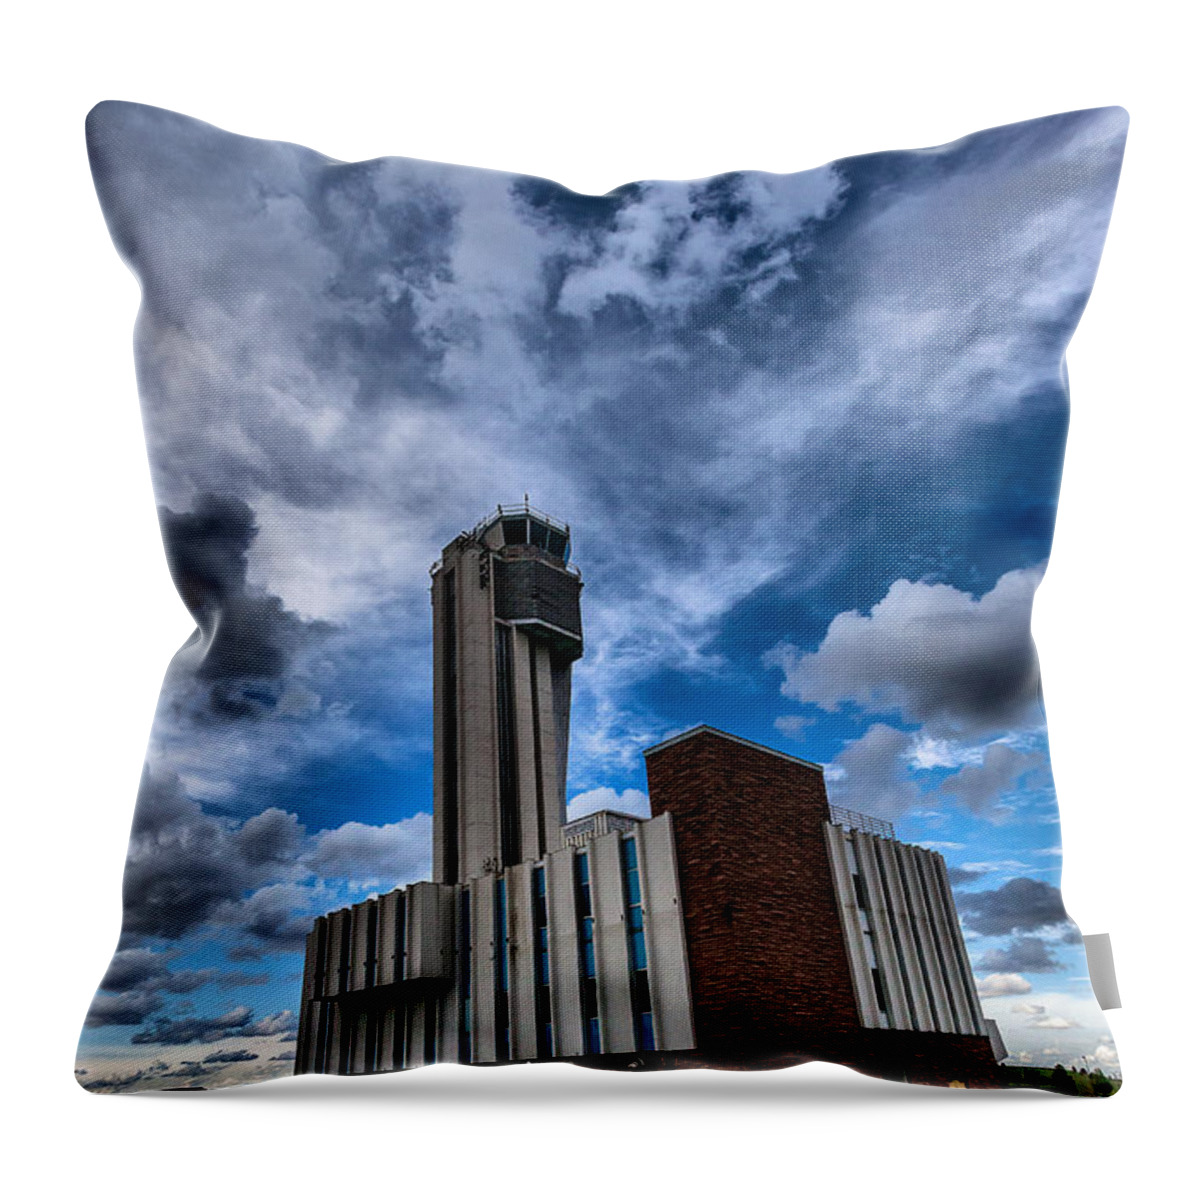 Airports Throw Pillow featuring the photograph Stapleton International Airport by Steven Reed